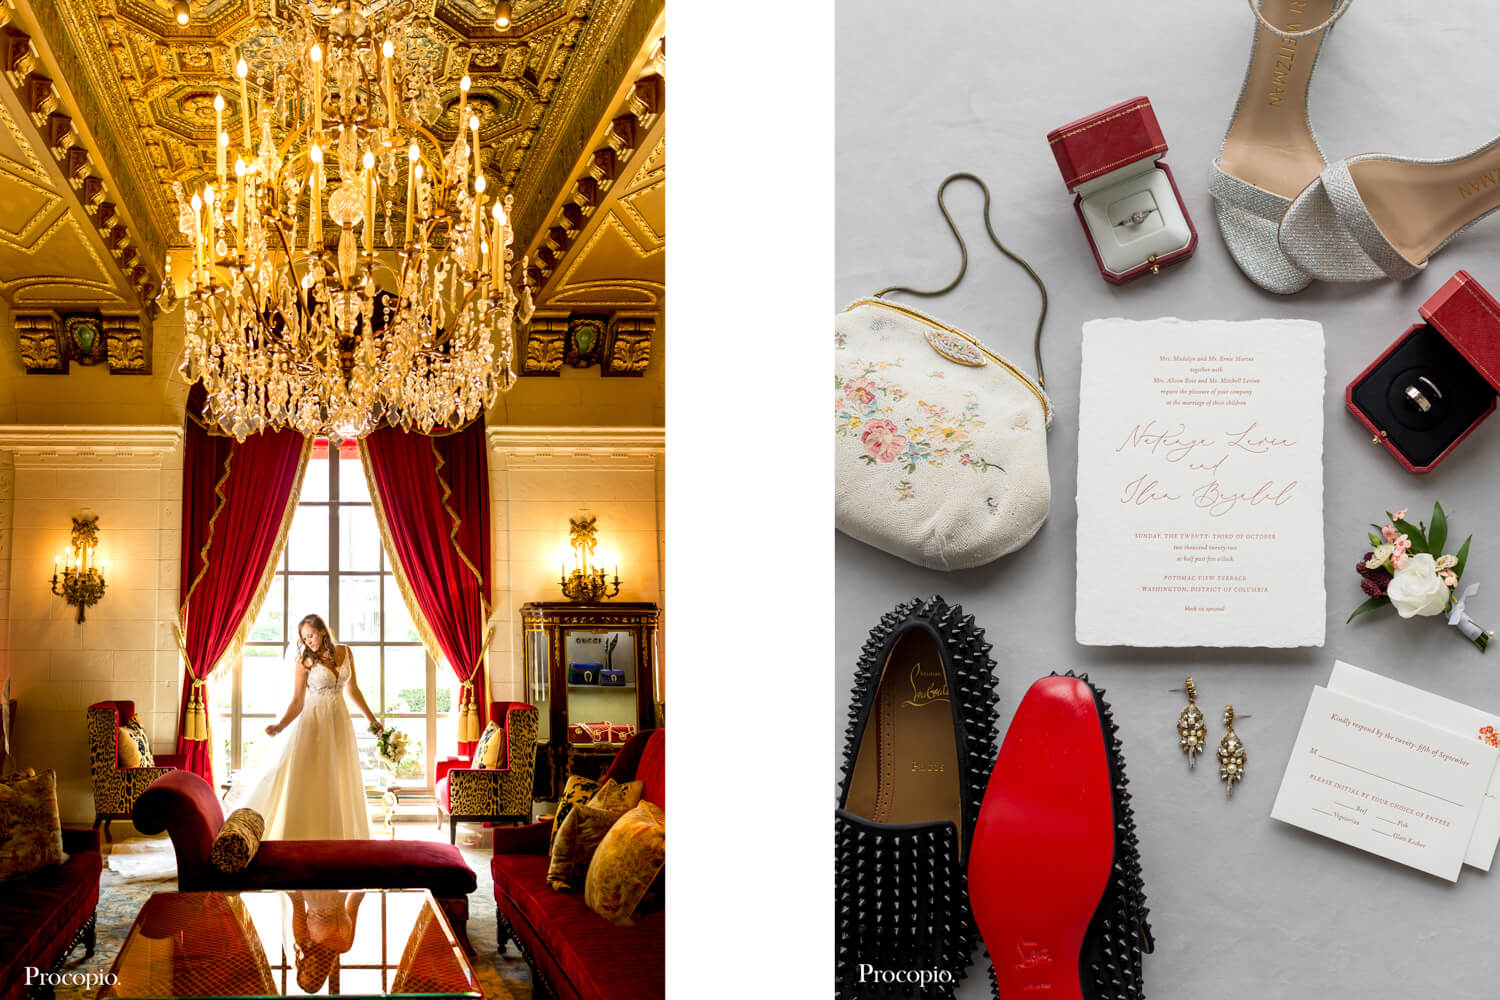 Loubontin shoes and red velvet furnitue - best Washington wedding planner - Sara Muchnick Events  - photo by Procopio Photography